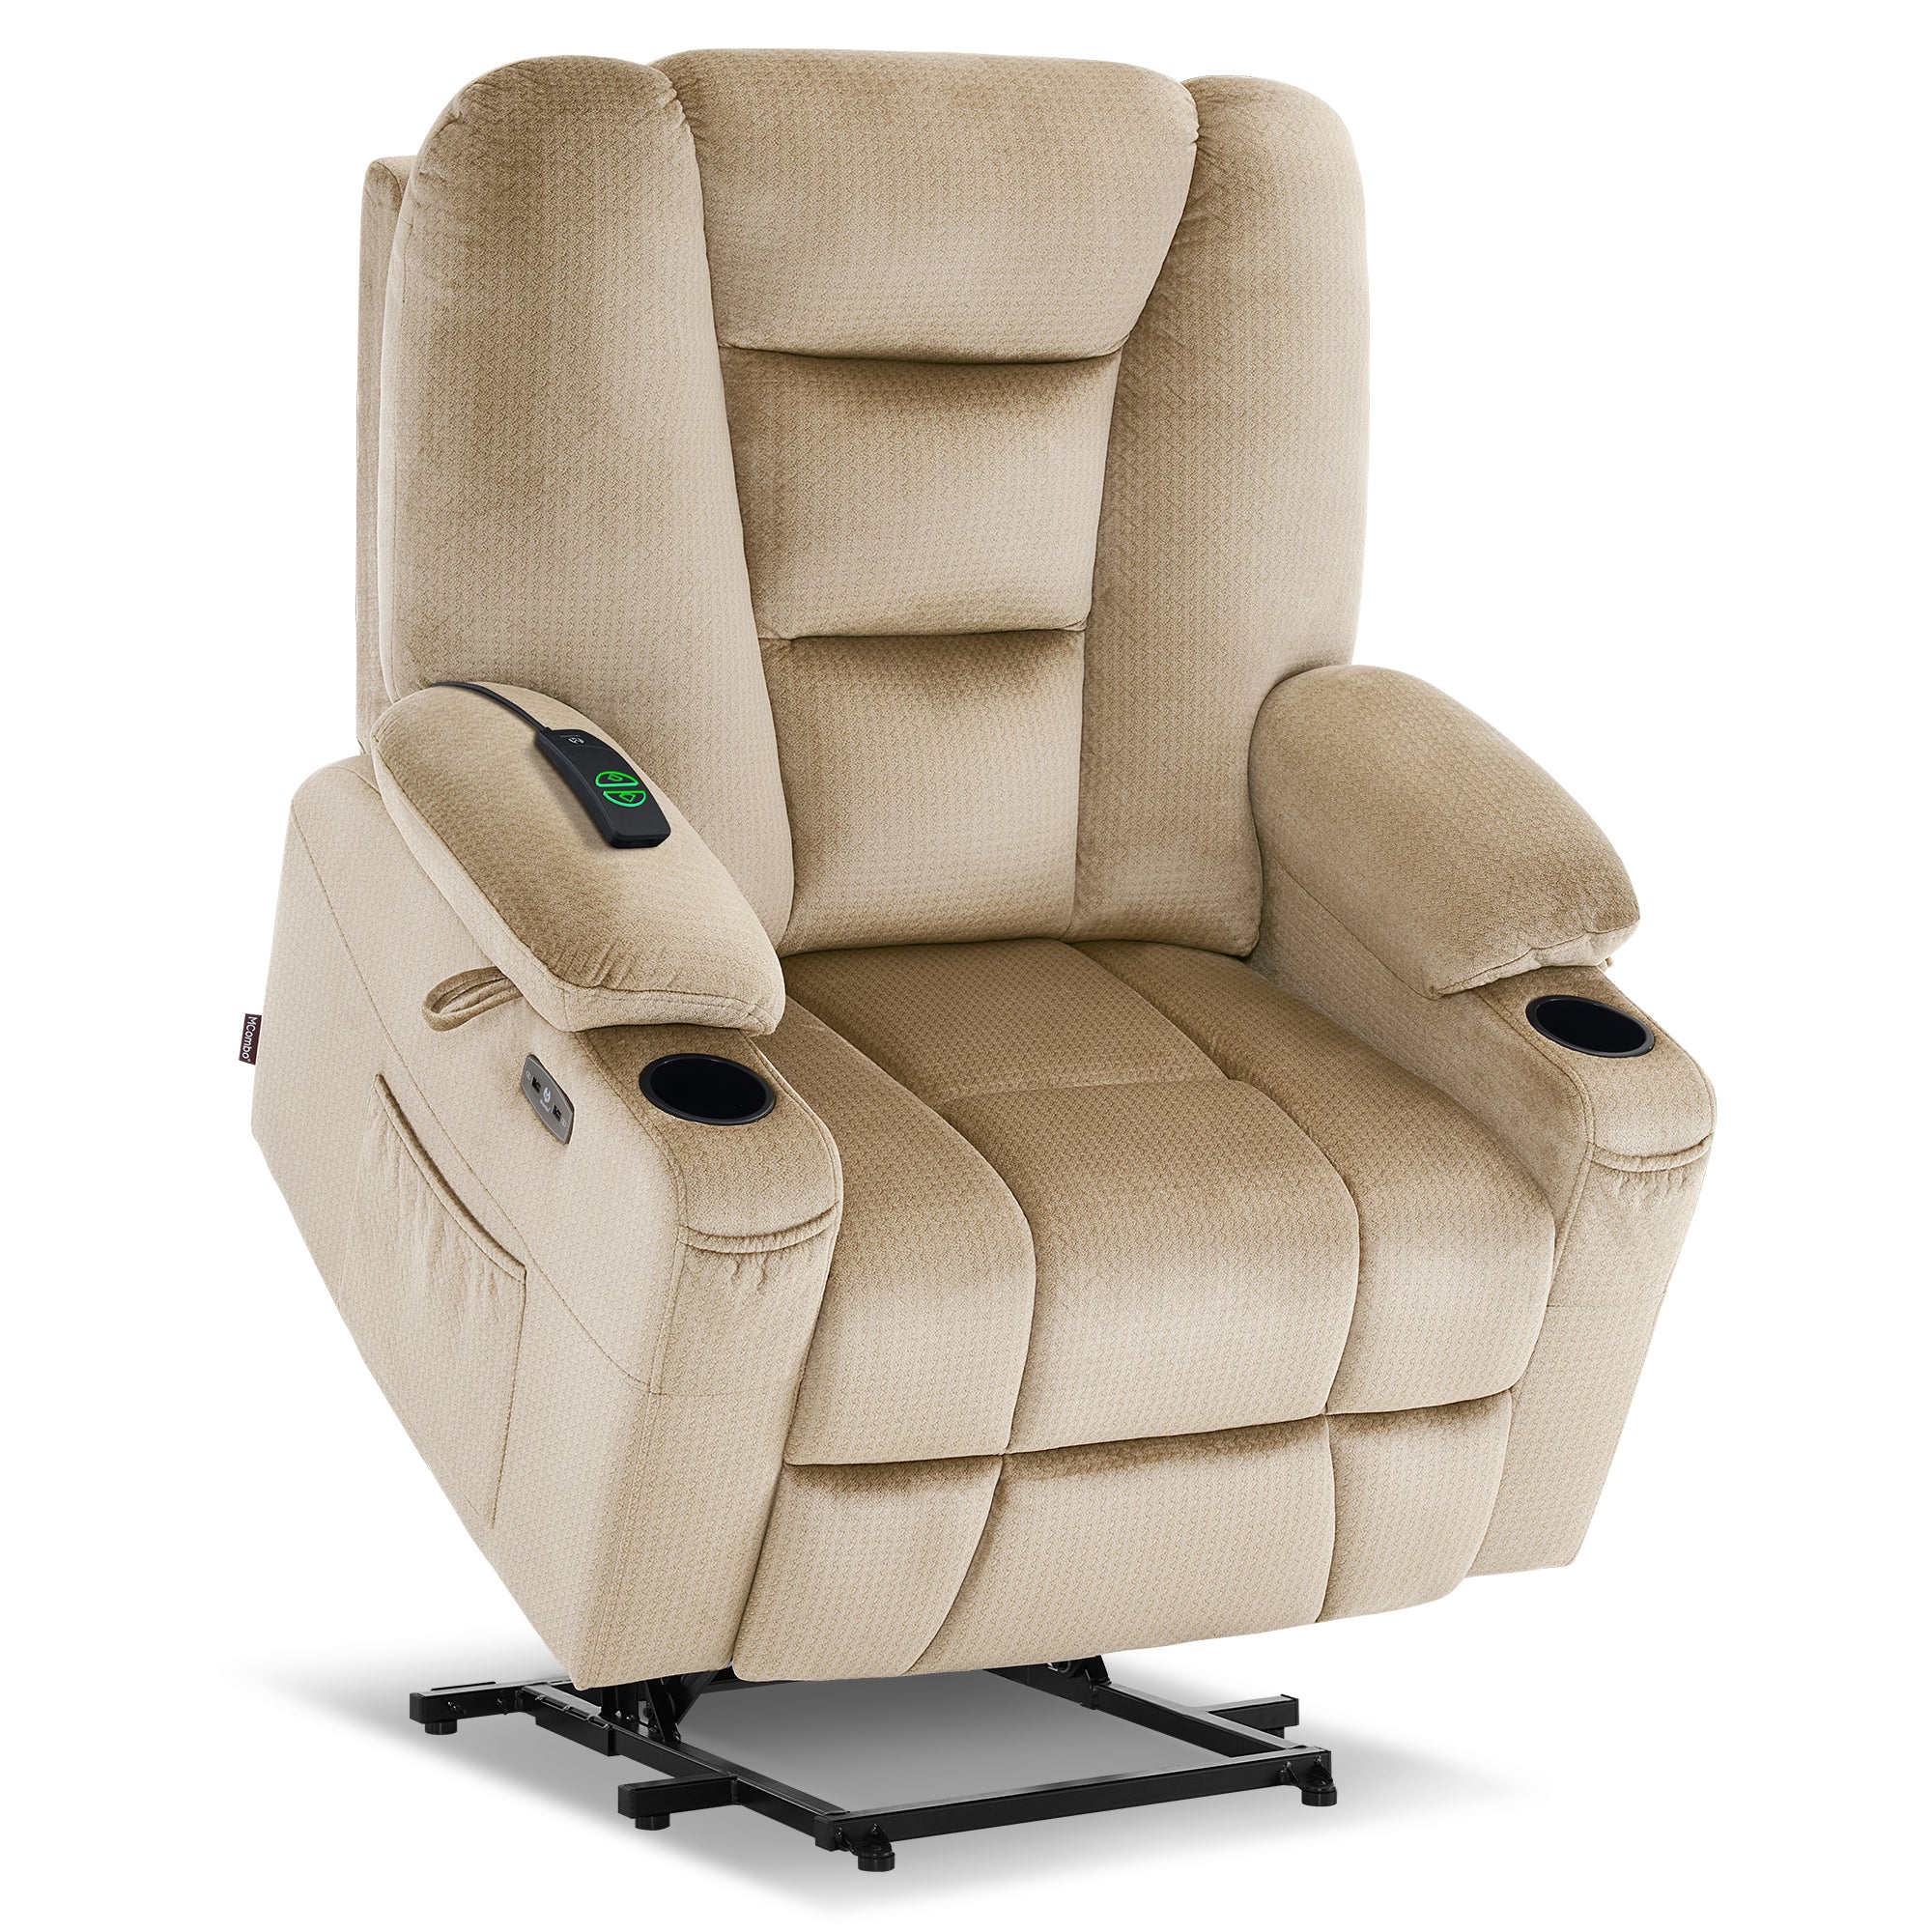 MCombo Power Lift Recliner Chair with Massage and Heat for Elderly People, Fabric 7529 Series